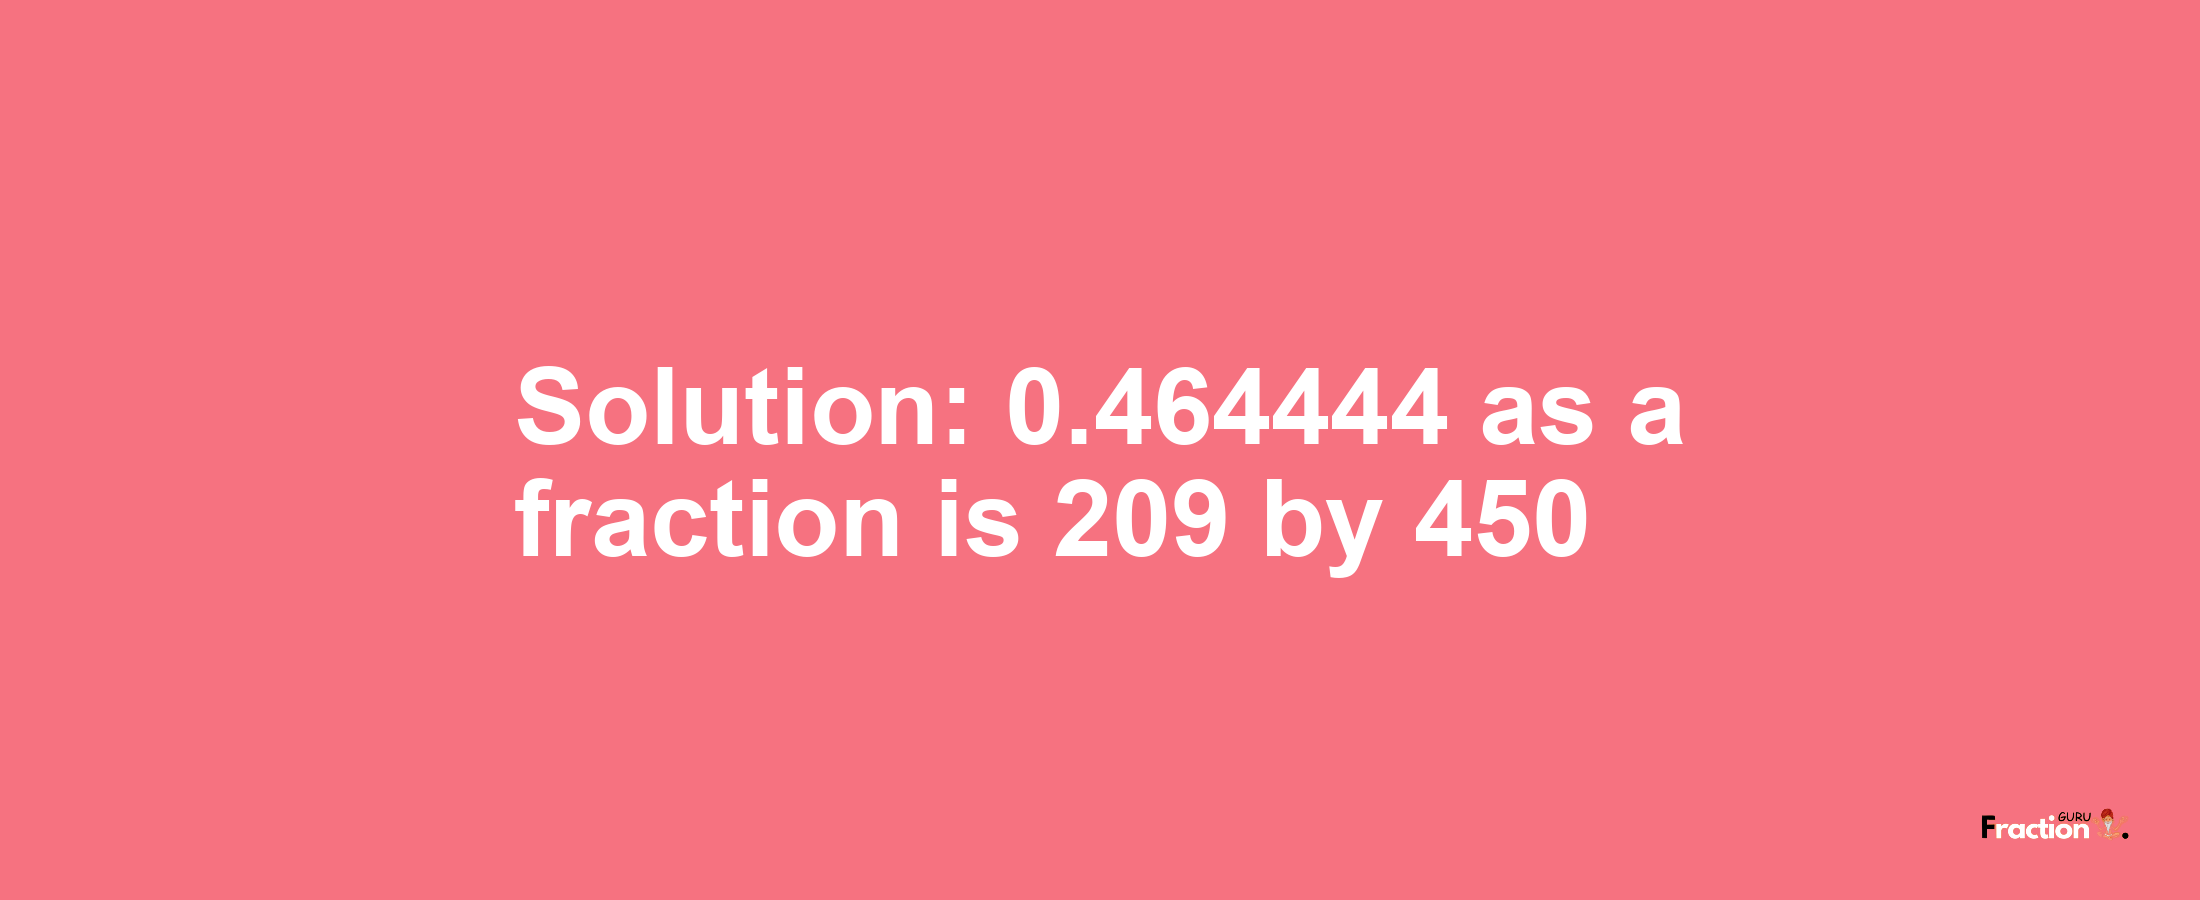 Solution:0.464444 as a fraction is 209/450